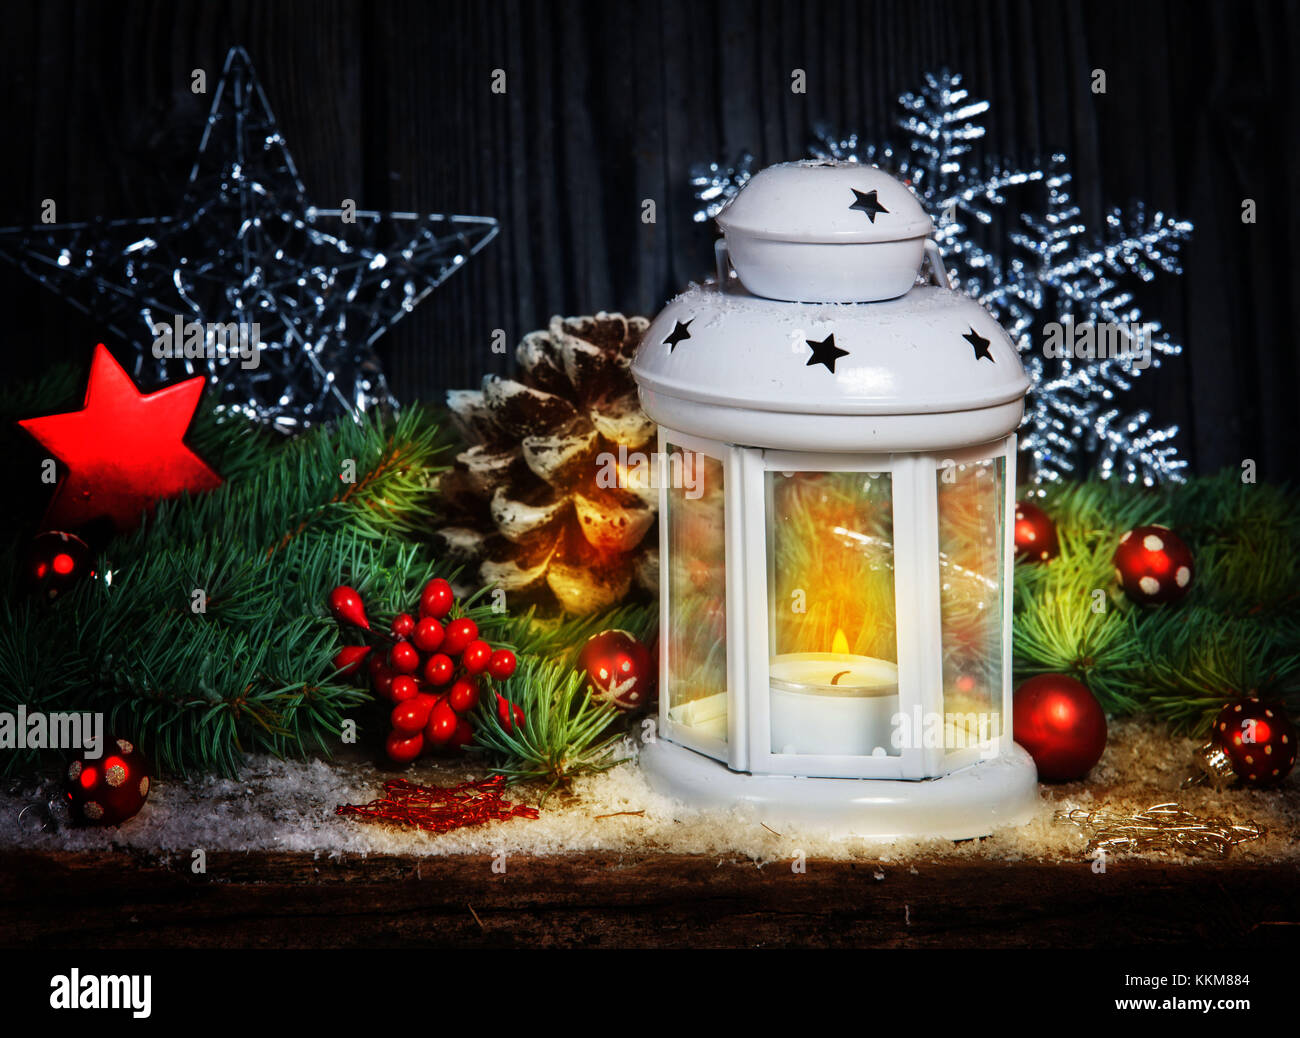 Decorazioni Natalizie Con Lanterne.White Lantern With Stars High Resolution Stock Photography And Images Alamy